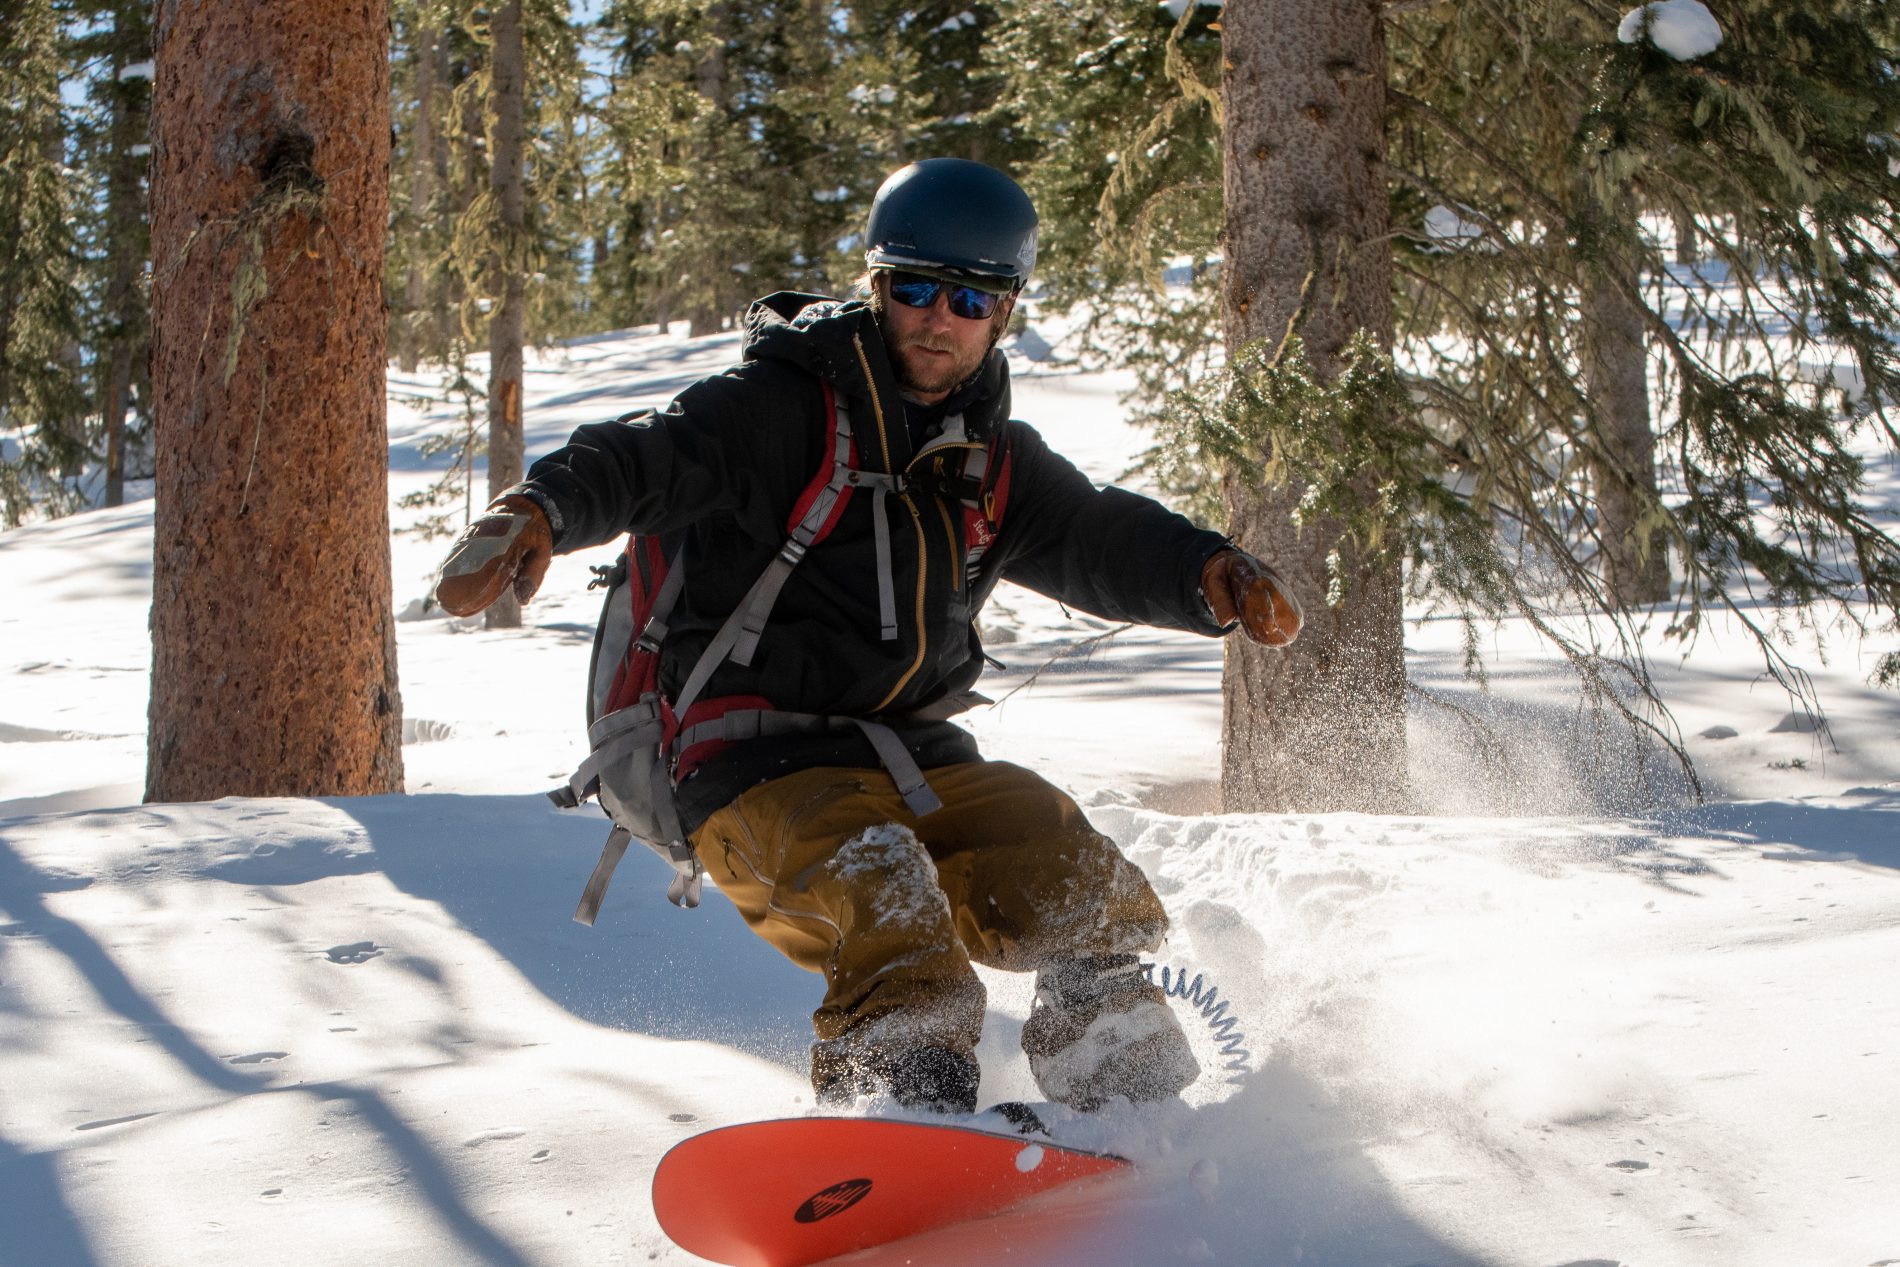 Snowboarder carving through trees.